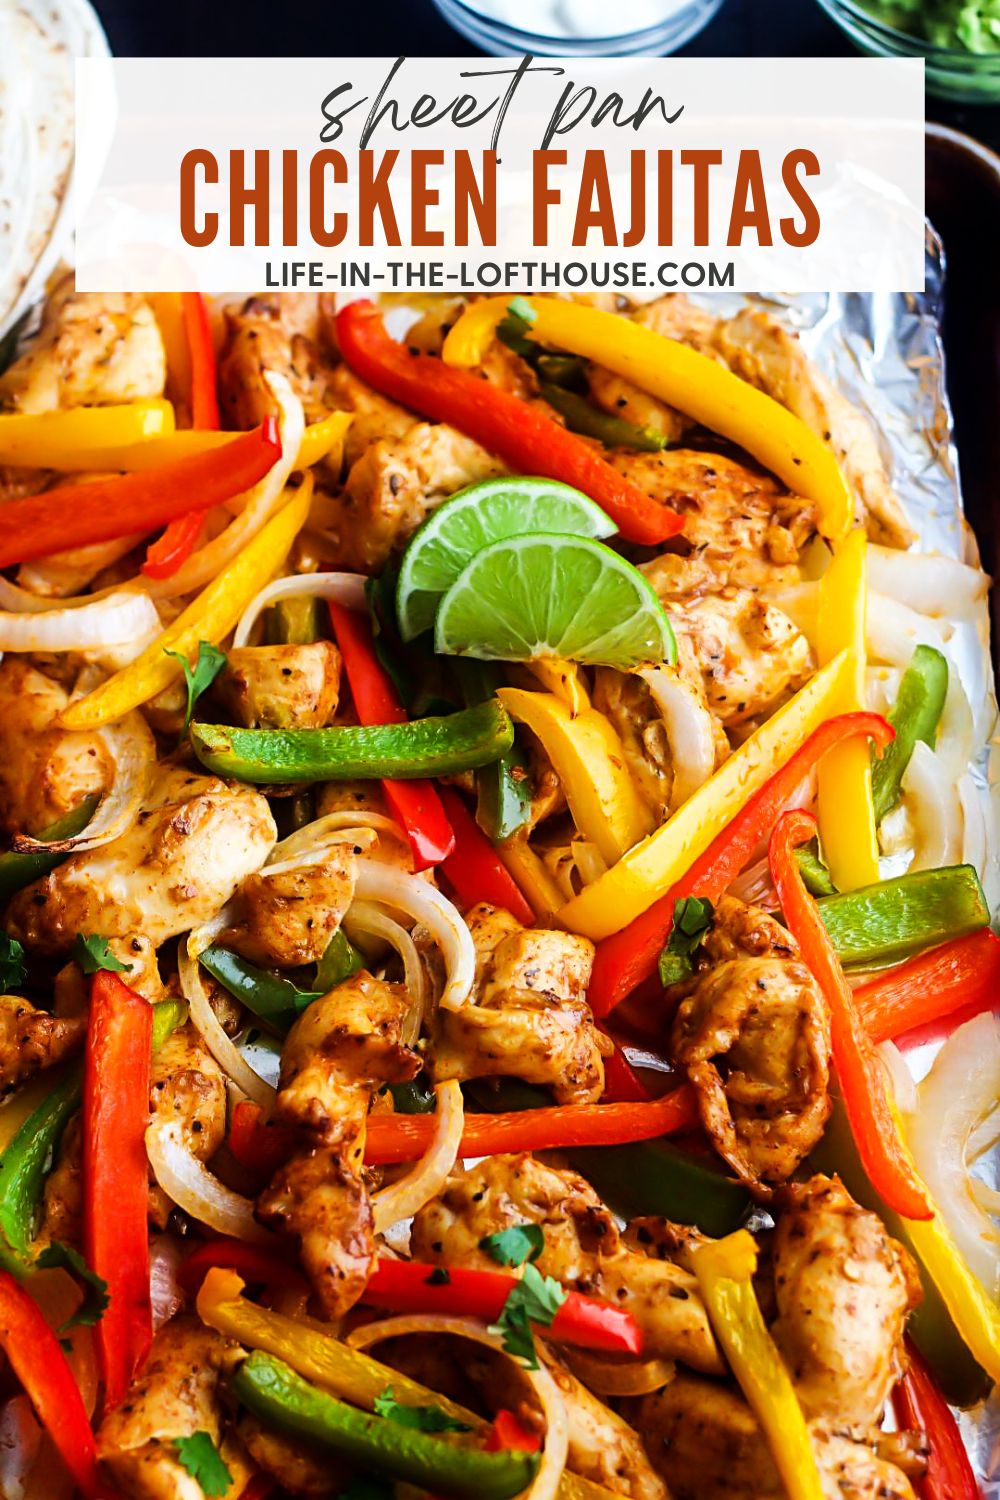 Sheet Pan Chicken Fajitas are pieces of chicken, peppers and onions full of southwest flavor. Life-in-the-Lofthouse.com